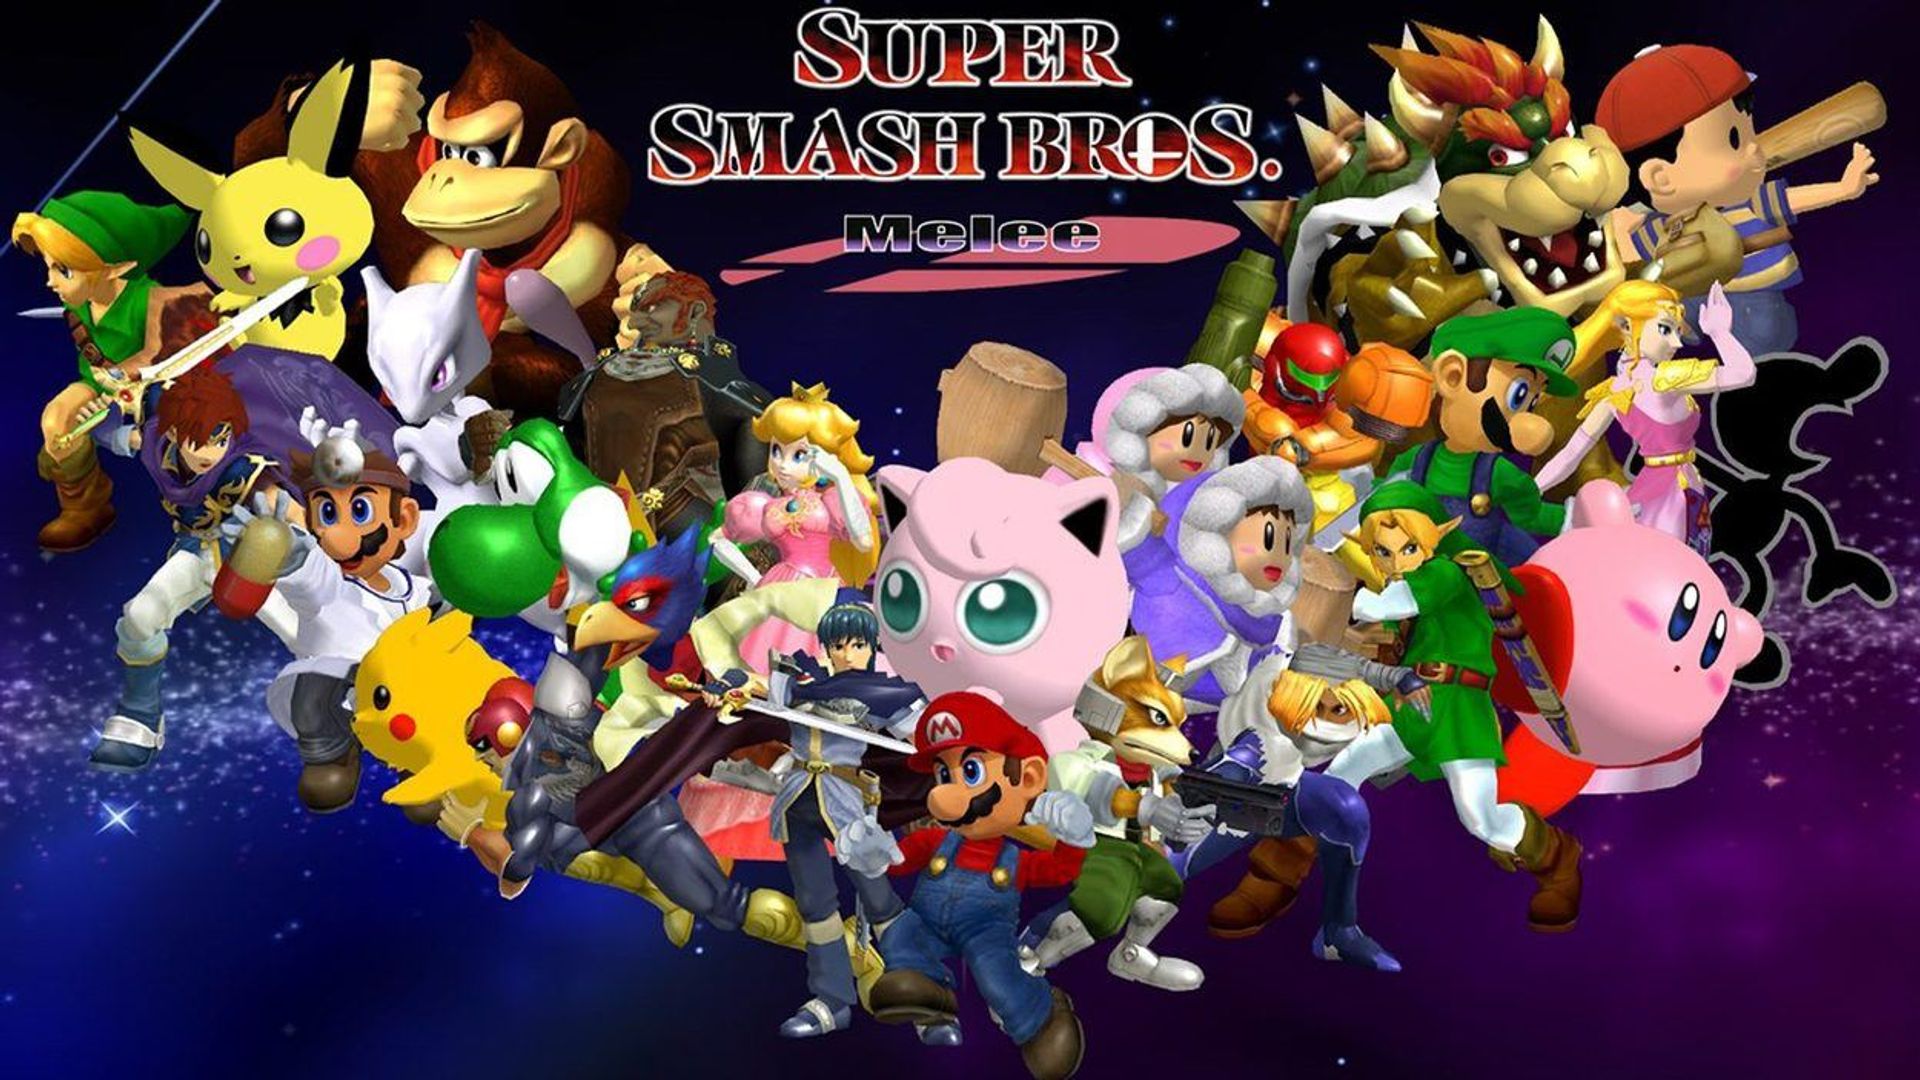 A Spectator's Guide to Super Smash Bros. Melee